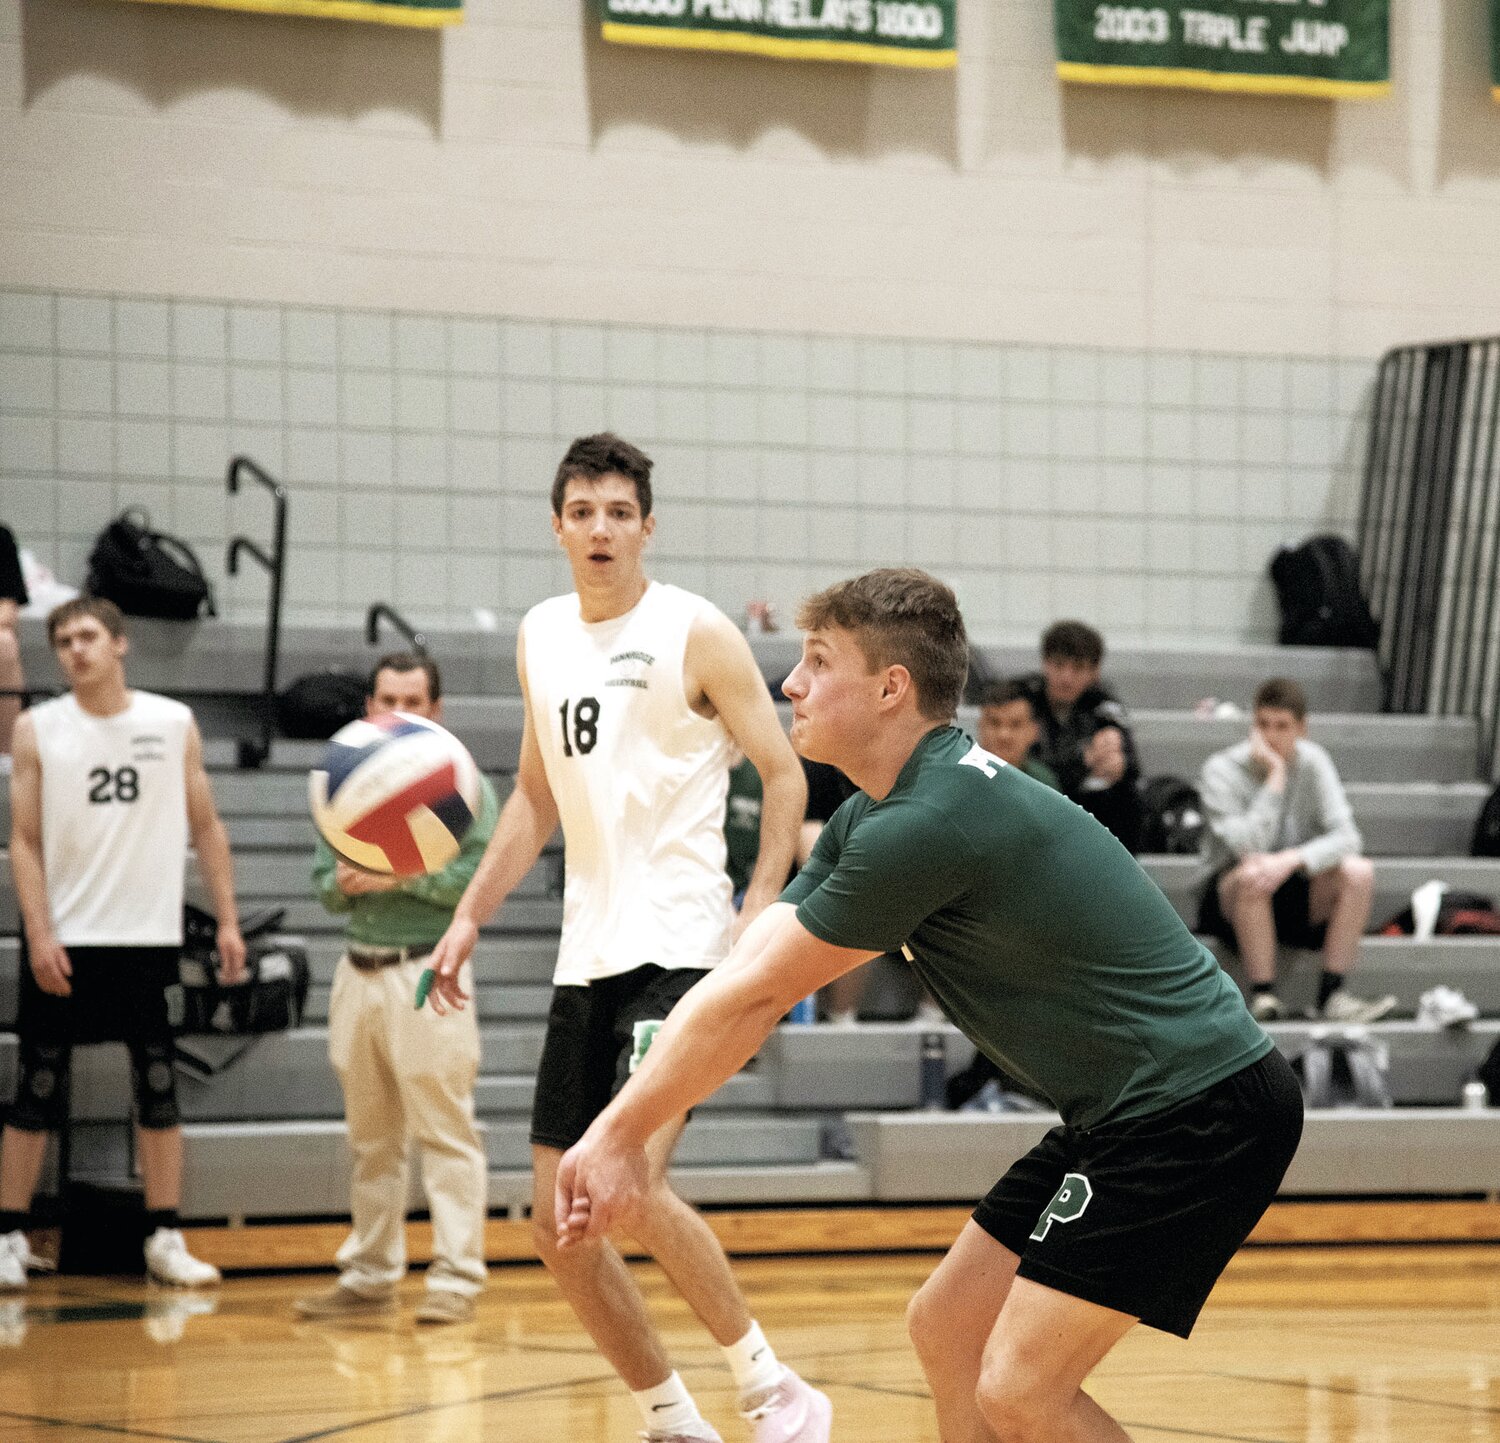 Pennridge’s Ty Porter had 13 digs in last Thursday’s quarterfinal game against Neshaminy, won by the Rams.